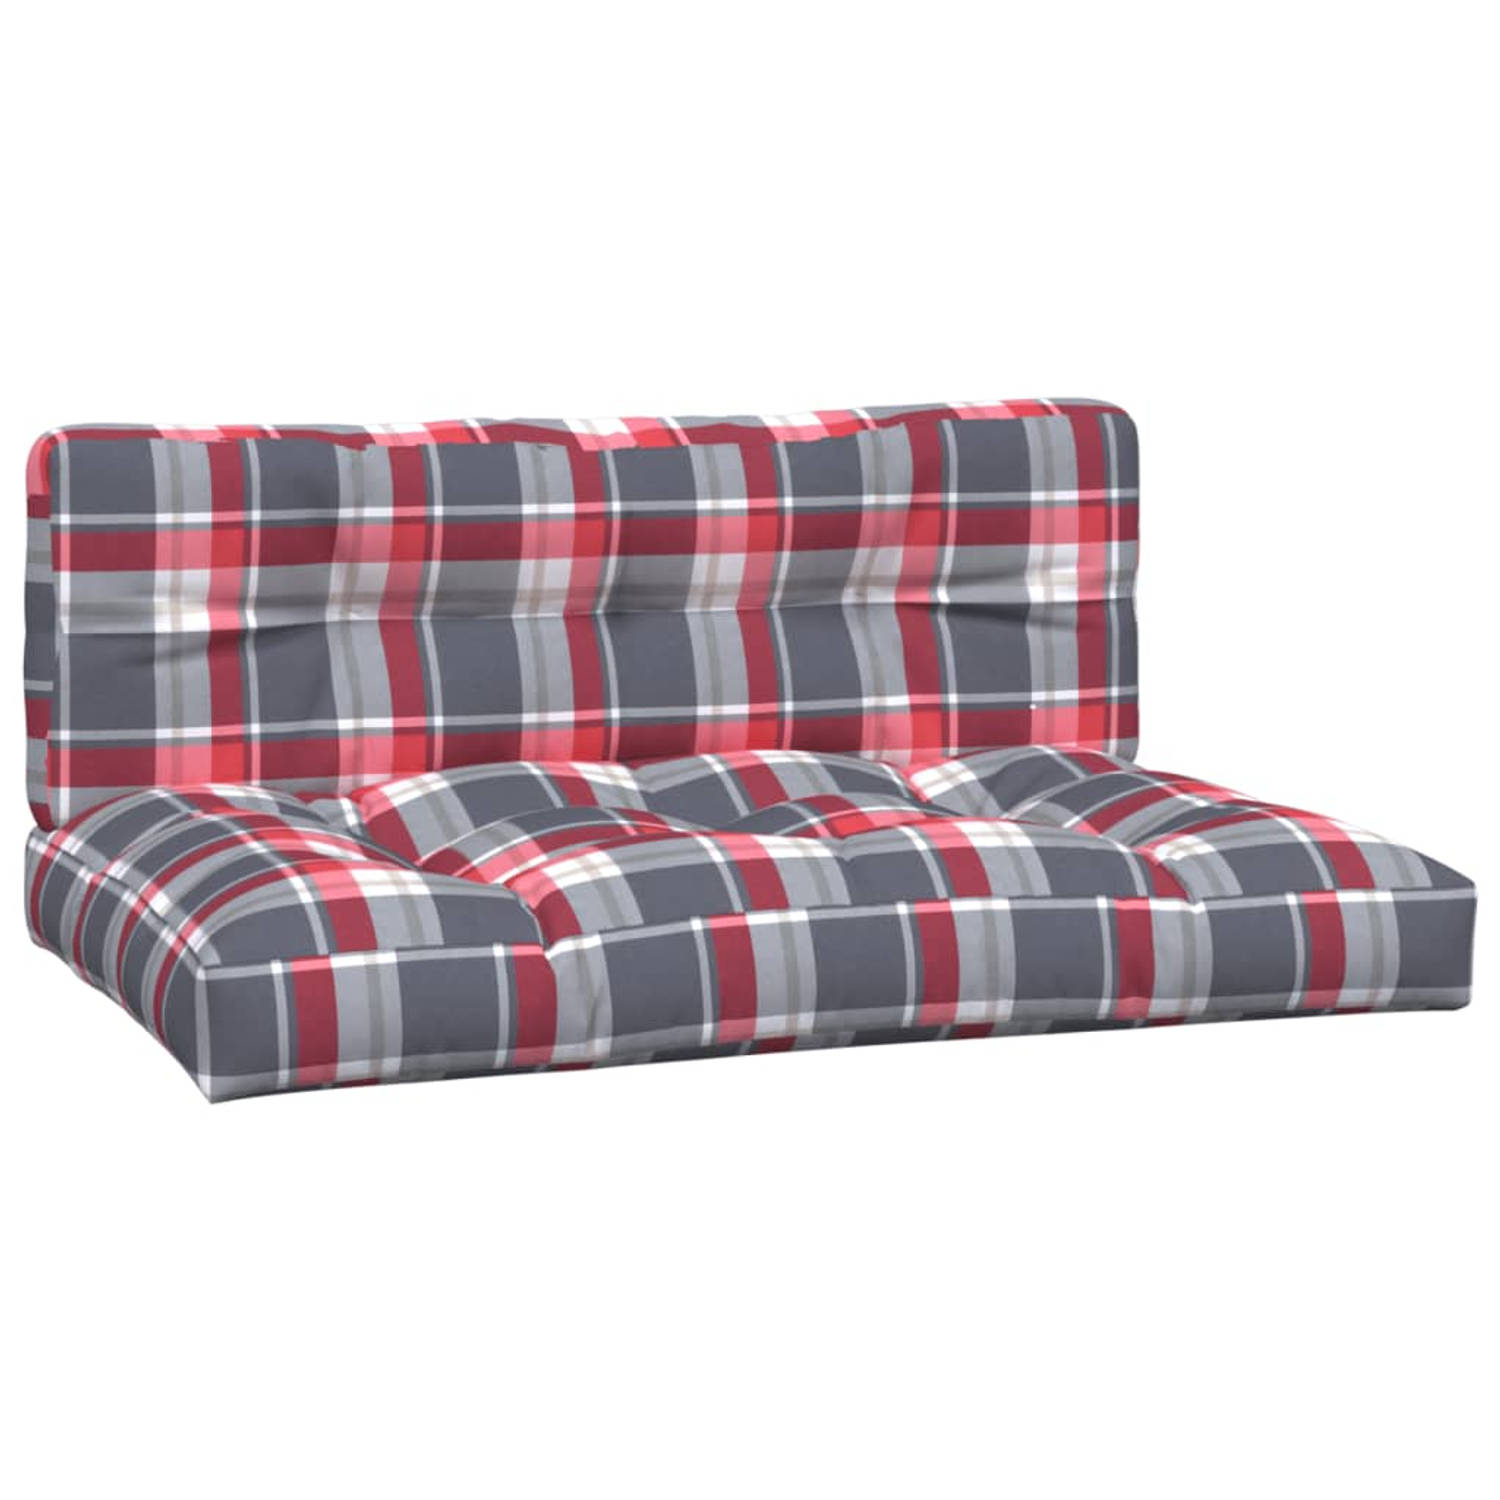 The Living Store Palletkussens - Polyester - Zachte vulling - Brede toepassing - 120 x 80 x 12 cm - Met rood